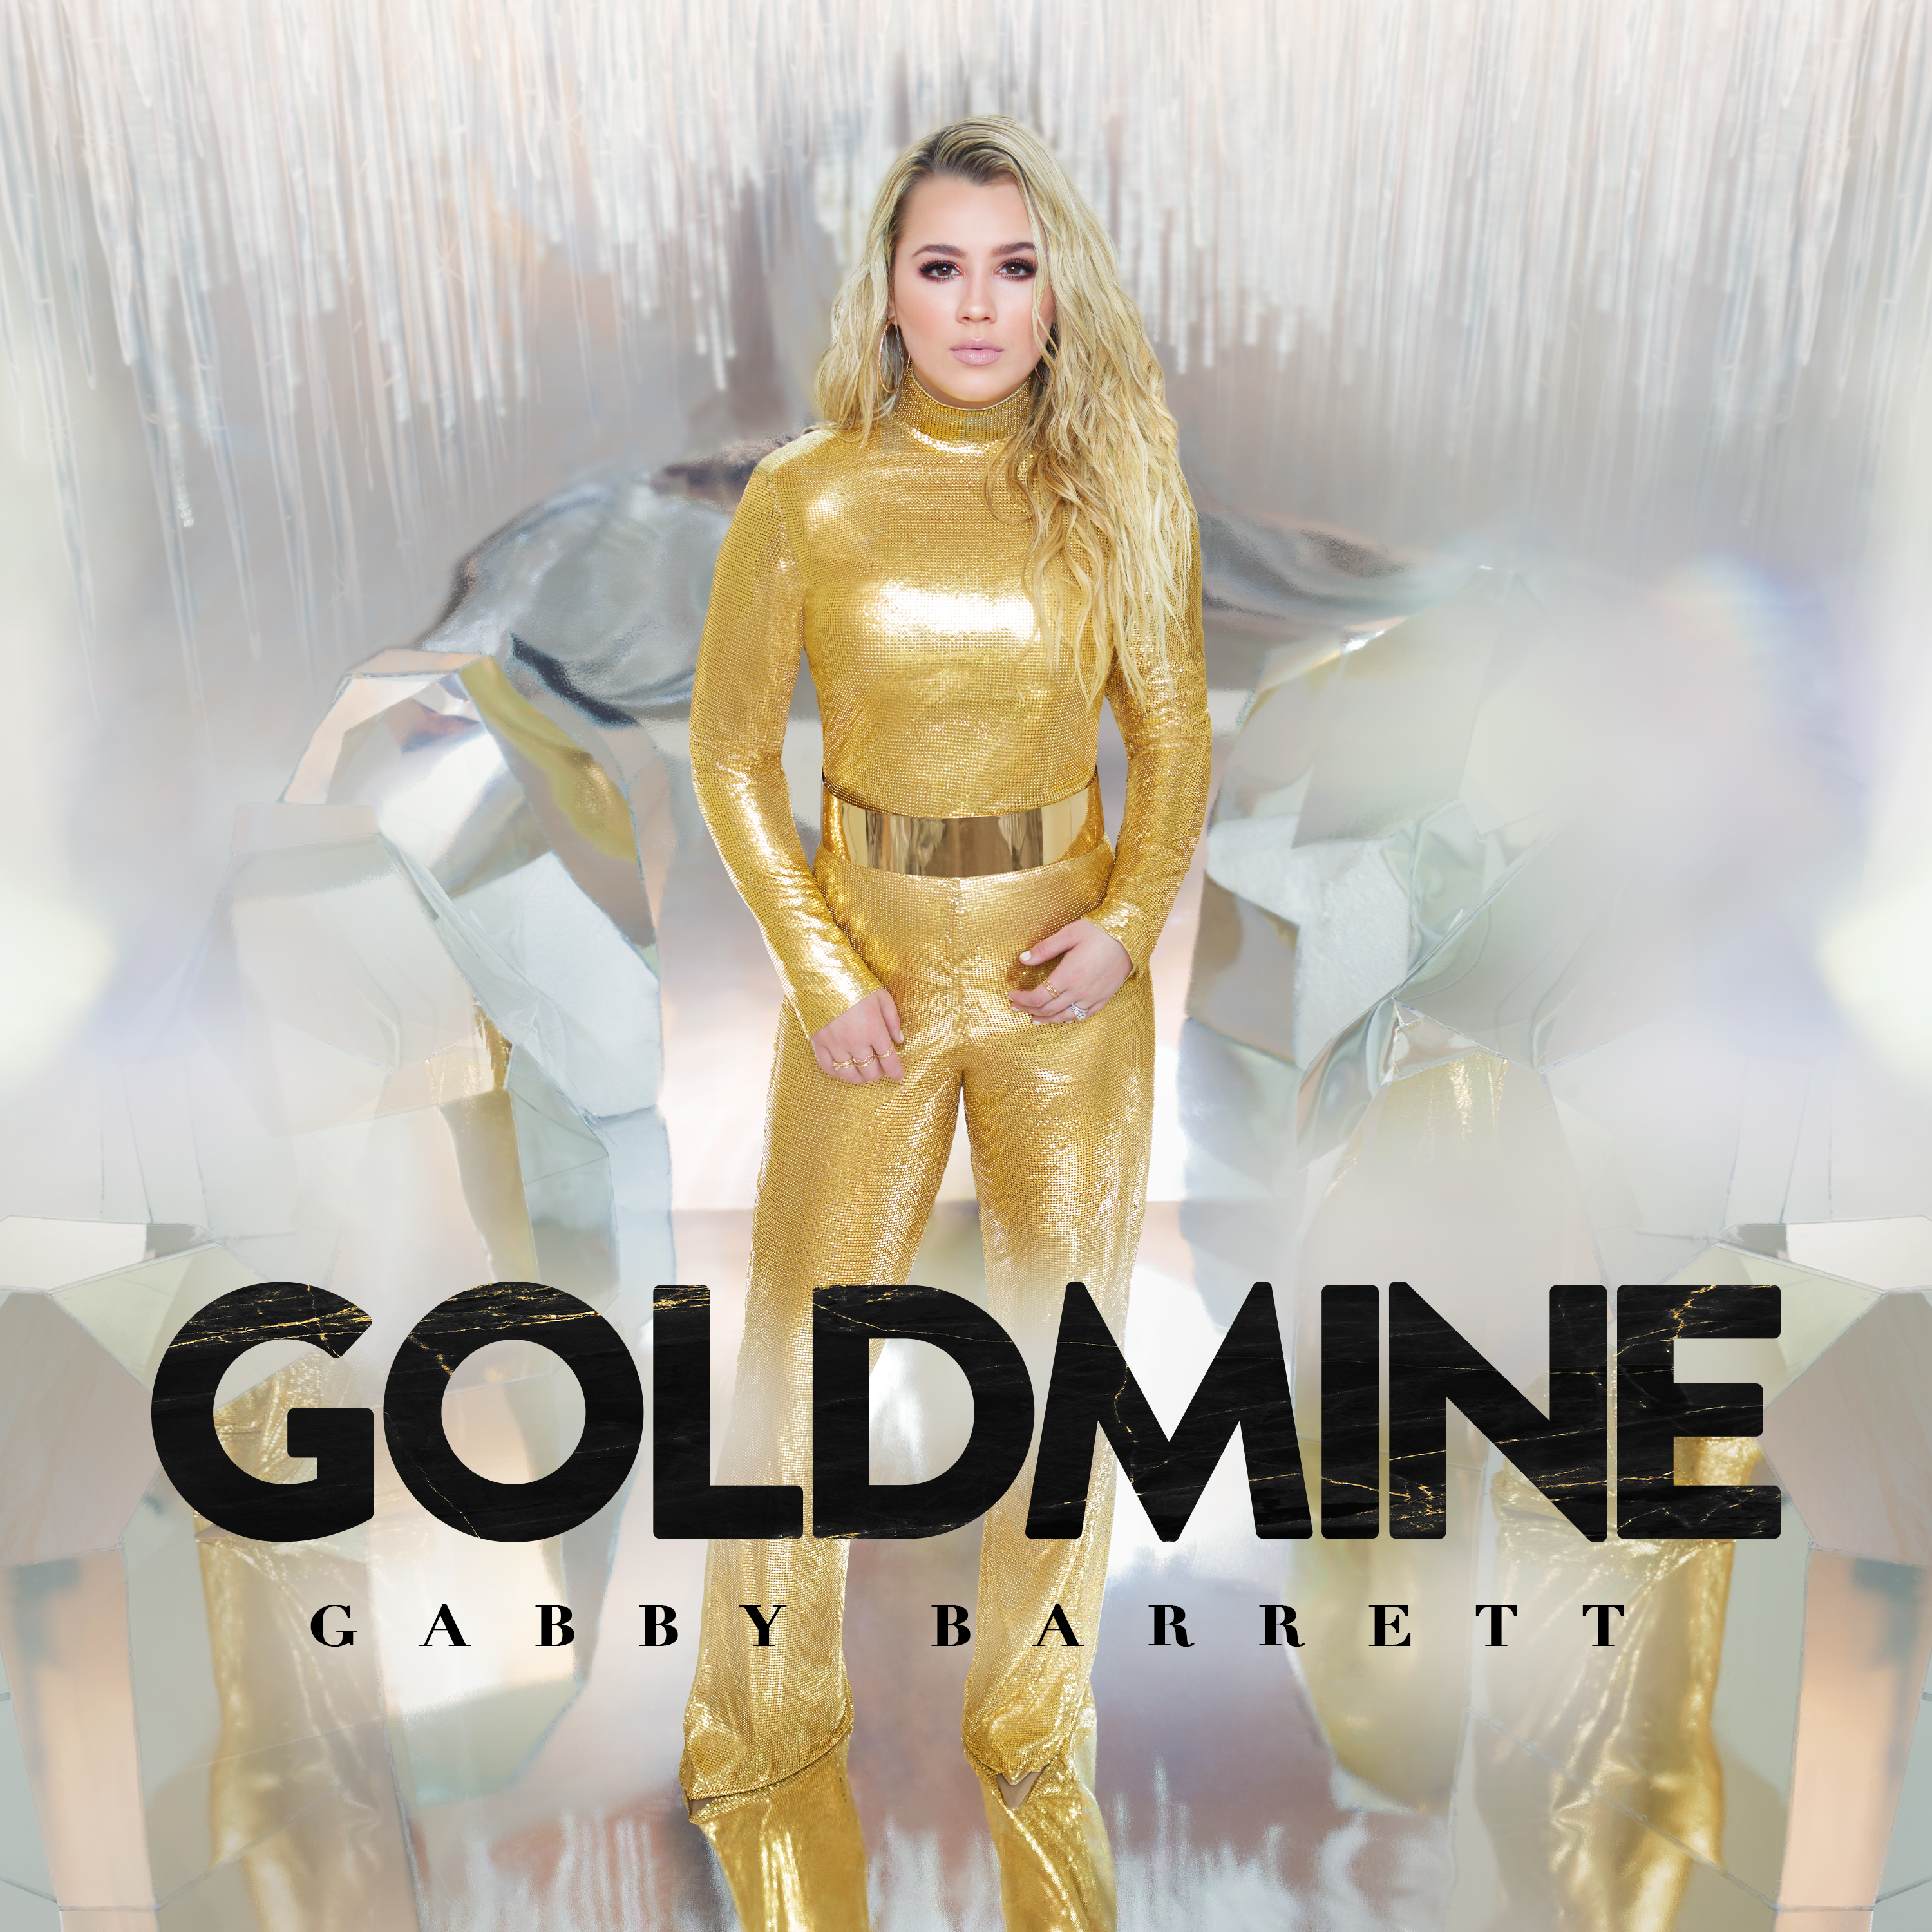 GABBY BARRETT EARNS THE MOST FIRST-WEEK DEBUT ALBUM STREAMS FOR ANY COUNTRY ACT IN HISTORY WITH "GOLDMINE"